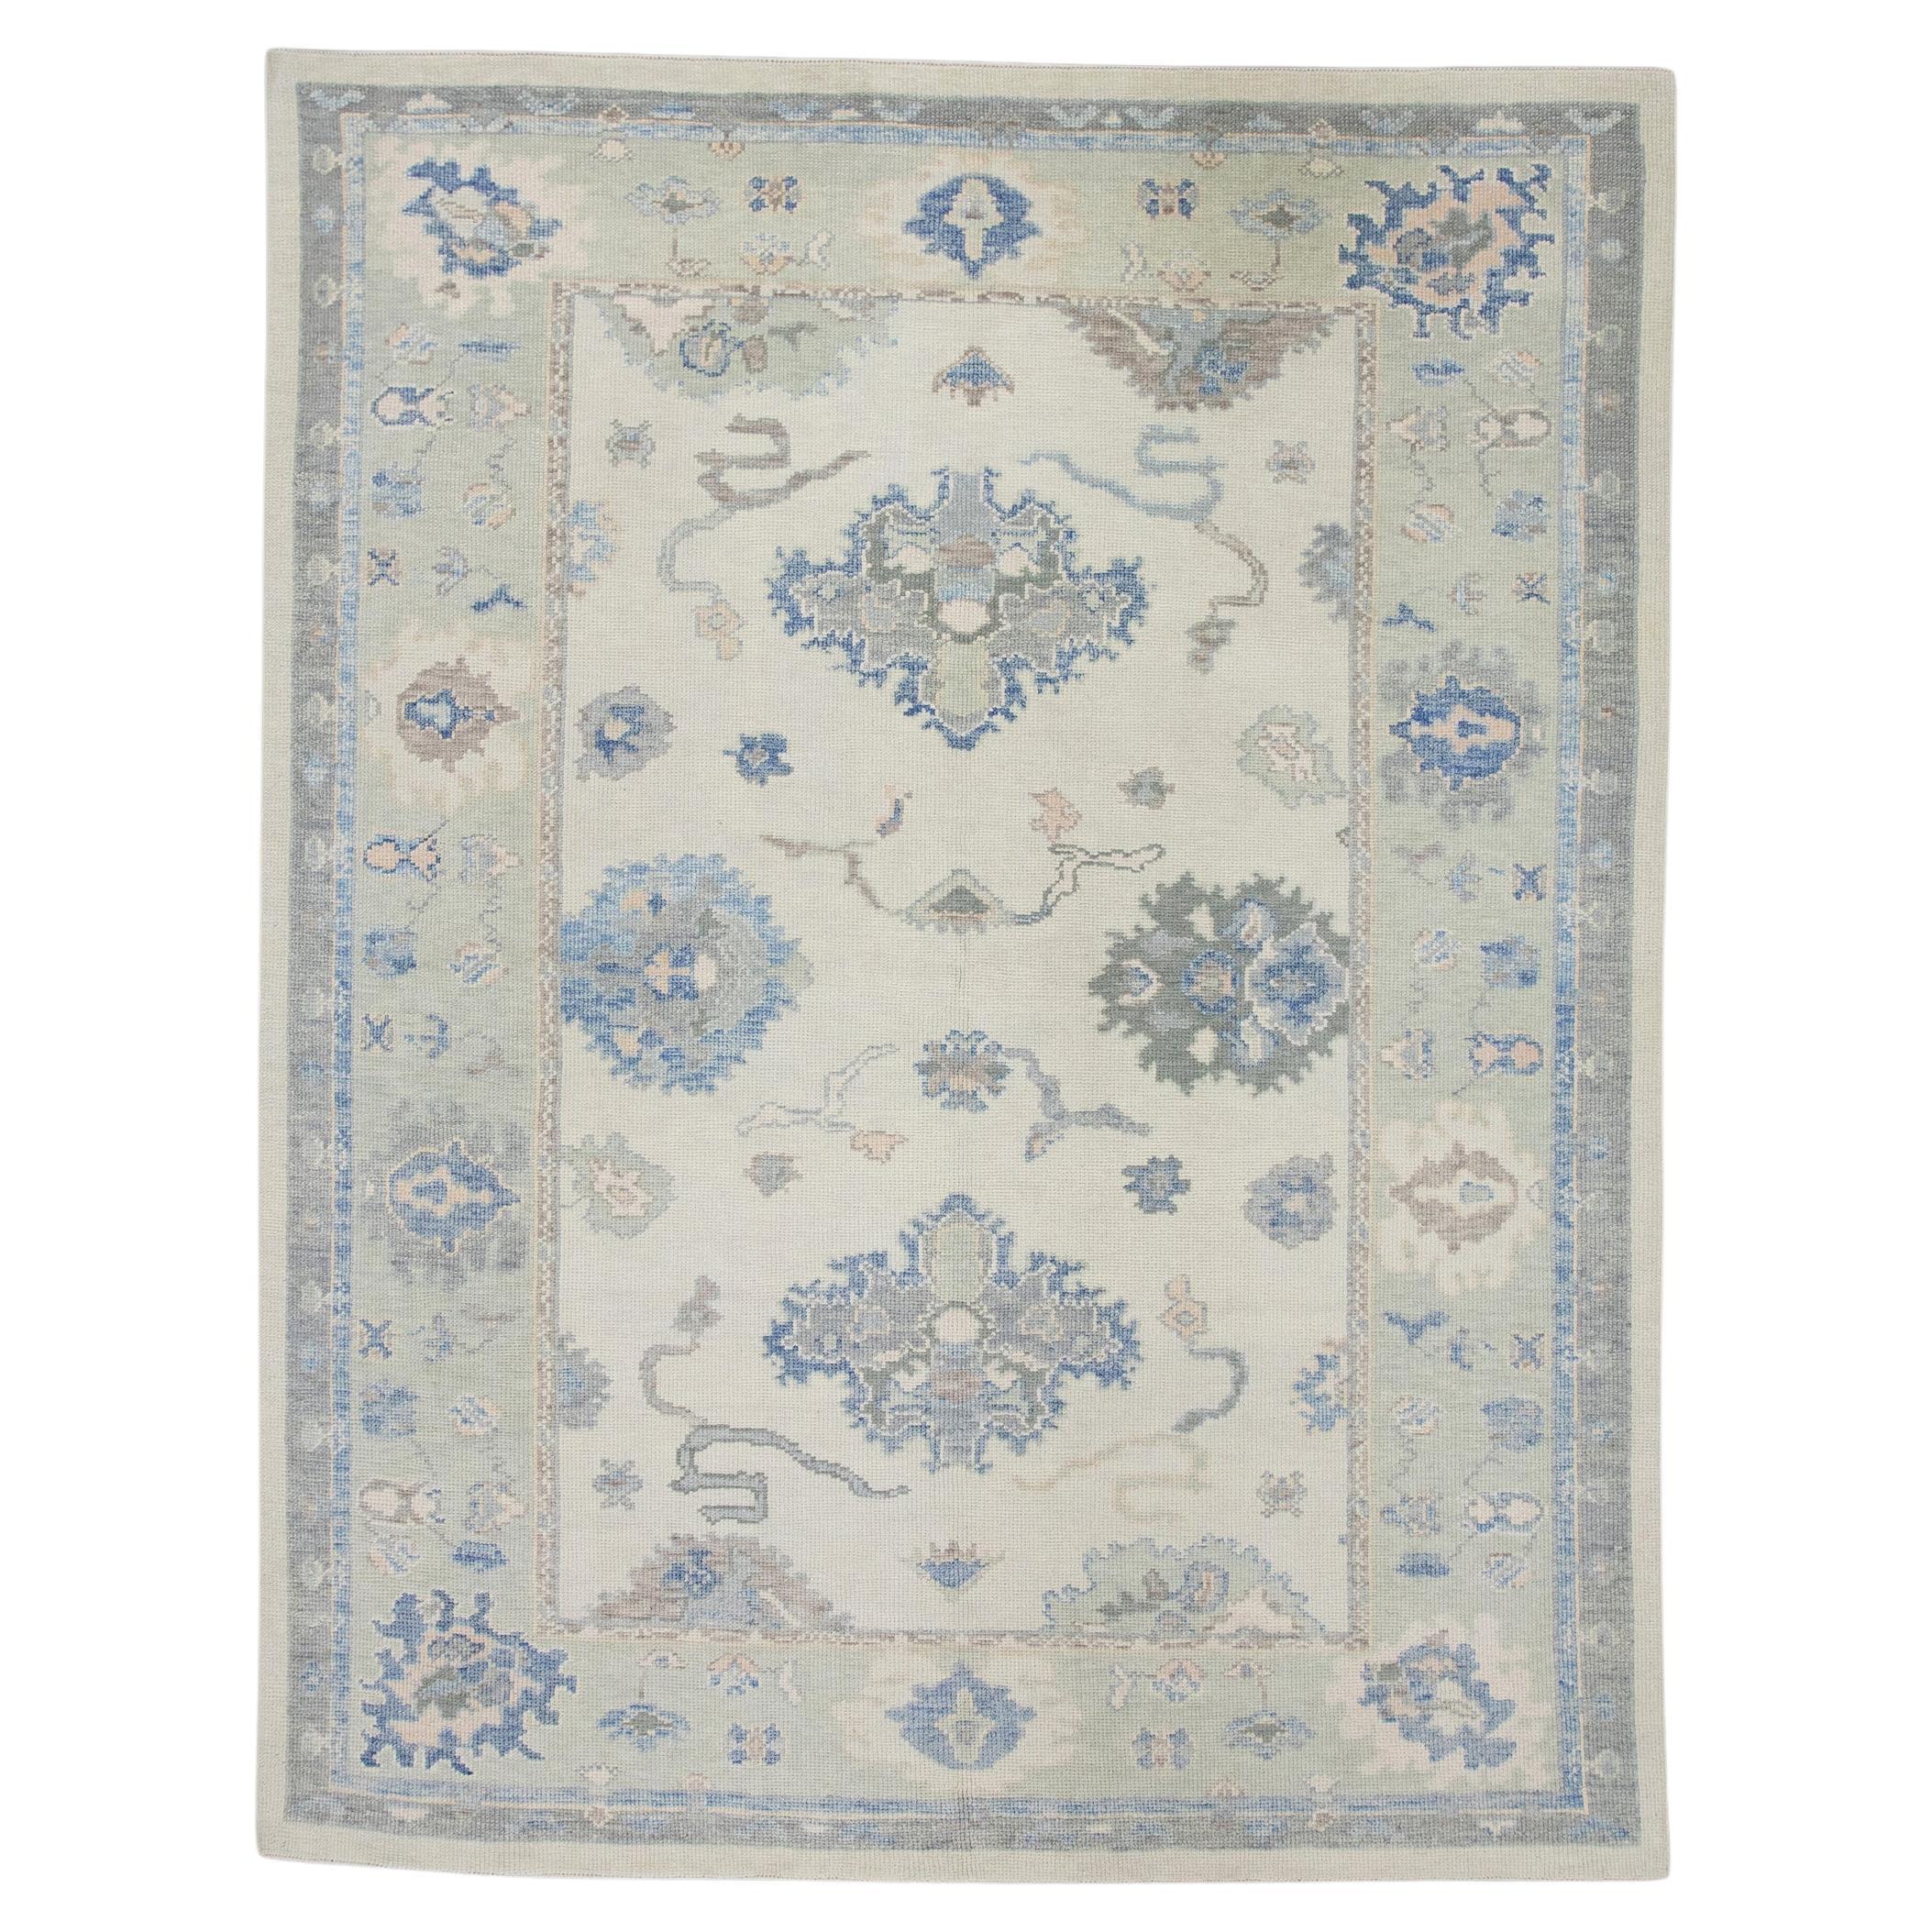 Green Handwoven Wool Turkish Oushak Rug in Blue Floral Pattern 6'1" x 7'11"